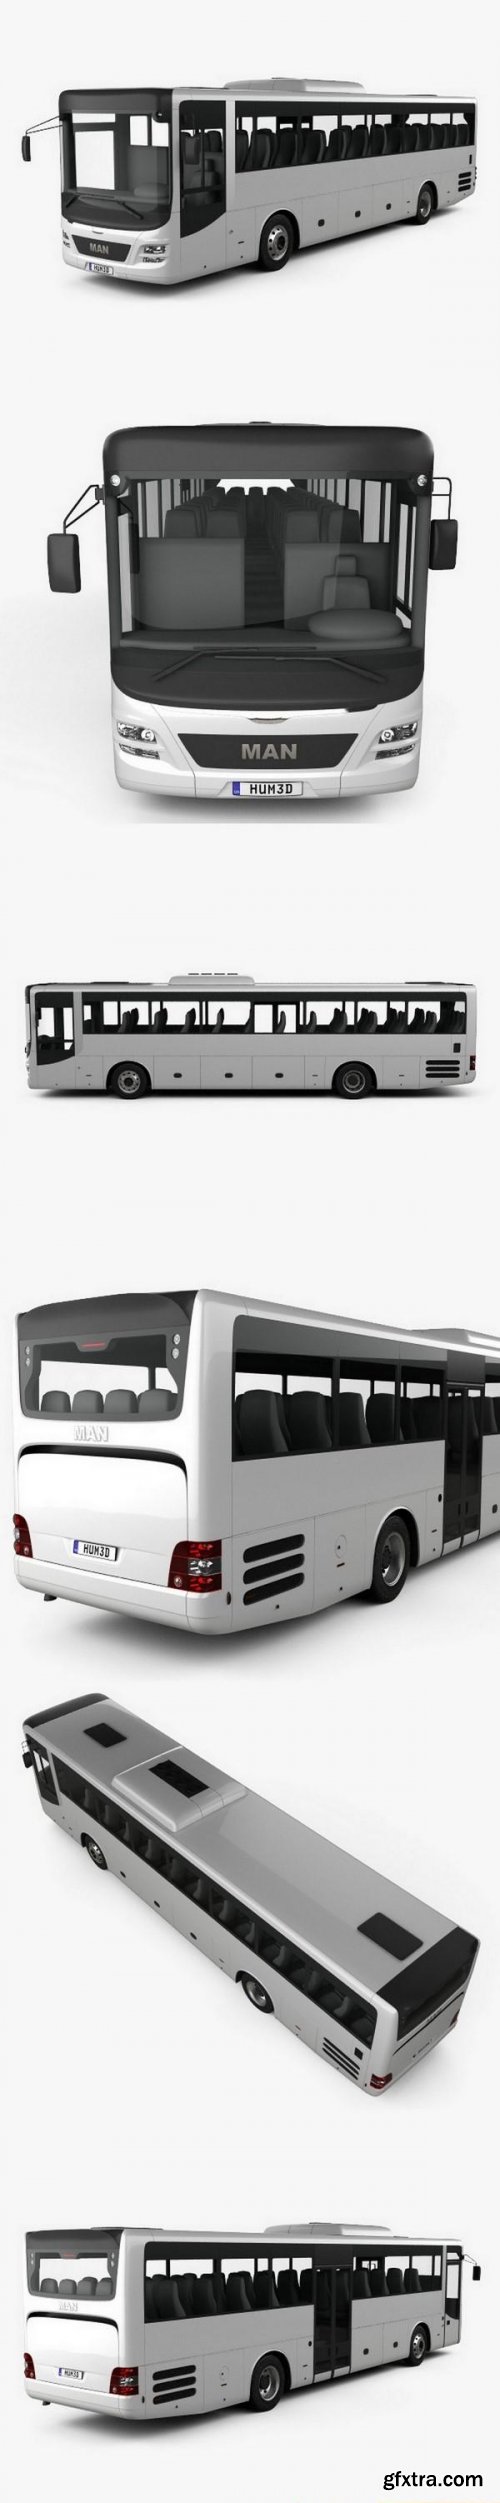 MAN Lion’s Intercity Bus with HQ interior 2015 3D model